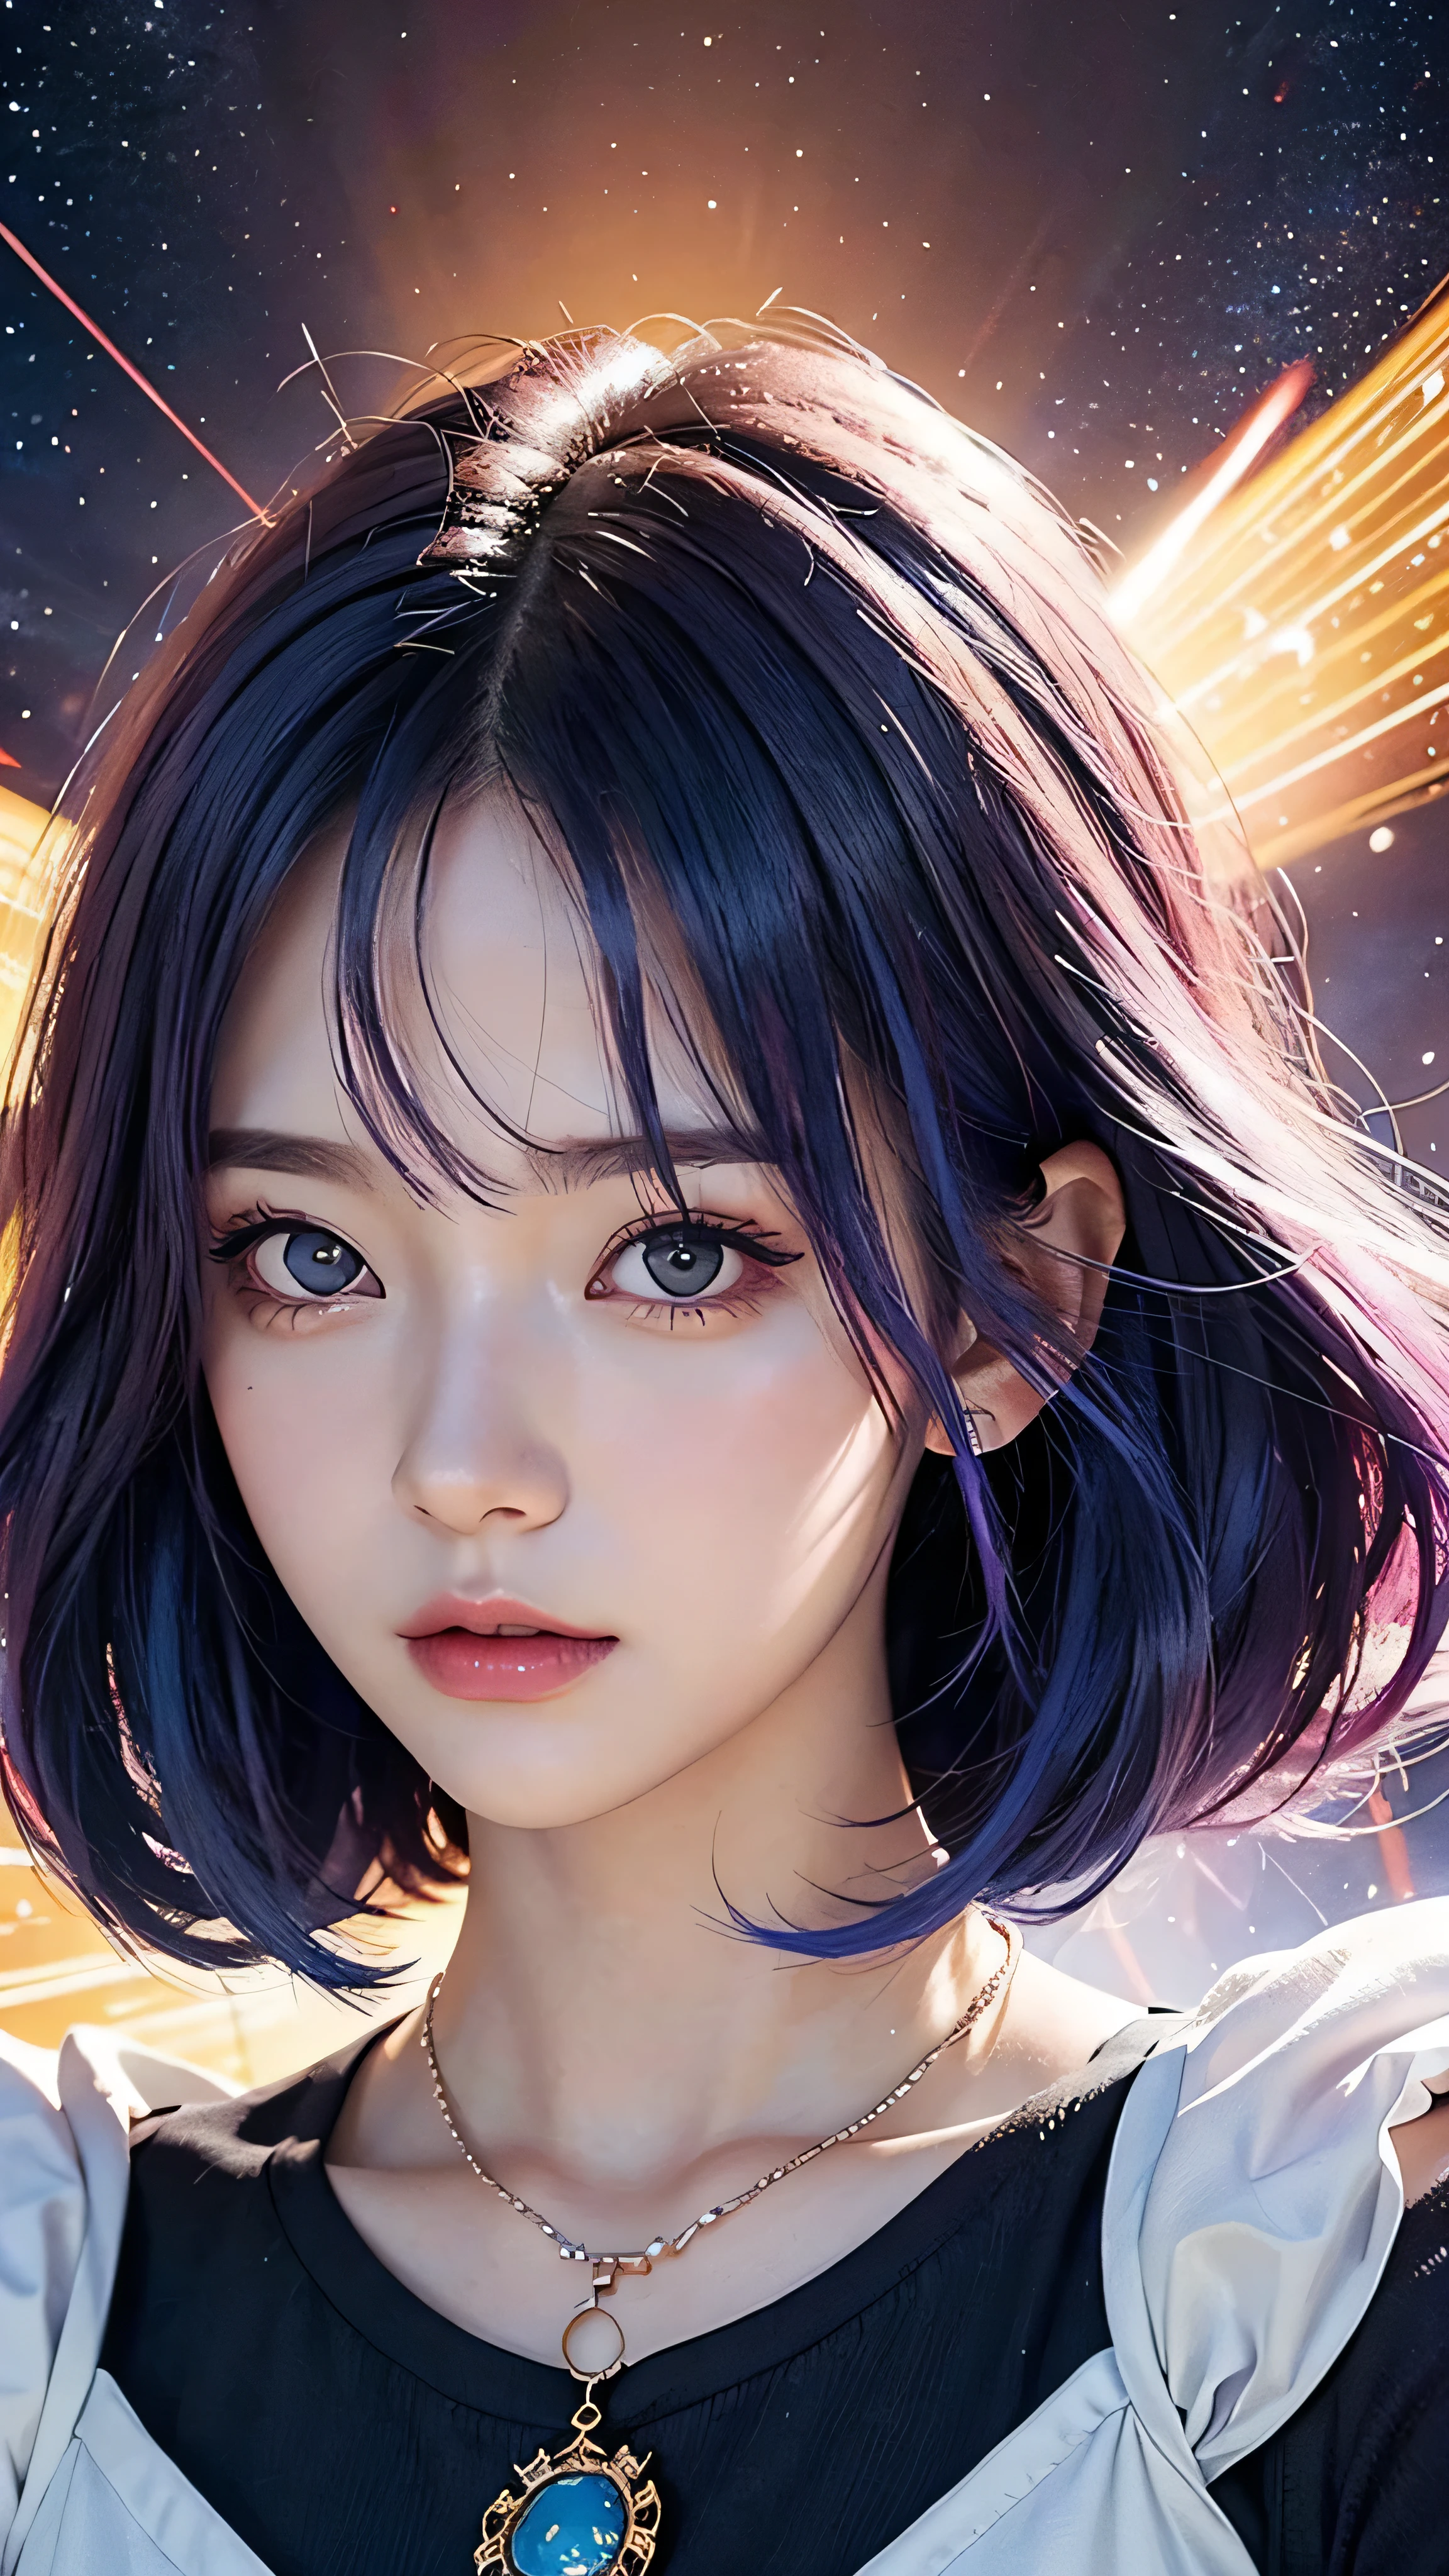 Close-up portrait:Stunning anime girl with space colored hair and necklace (up_portraitClose price:1.3)Enchanting anime girl with vibrant space-colored hair、Rossdraws&#39; soft vitality(Rossdraws_soft_vitality:1.5)、Govezスタイルのアートワーク(Govez_style:1.3)、Fantasy art style(fantasy_art_style:1.4)、Colorful digital fantasy art(Digital_fantasy_art:1.4)、Stunning and beautiful anime style(beautiful_アニメ_style:1.5)、